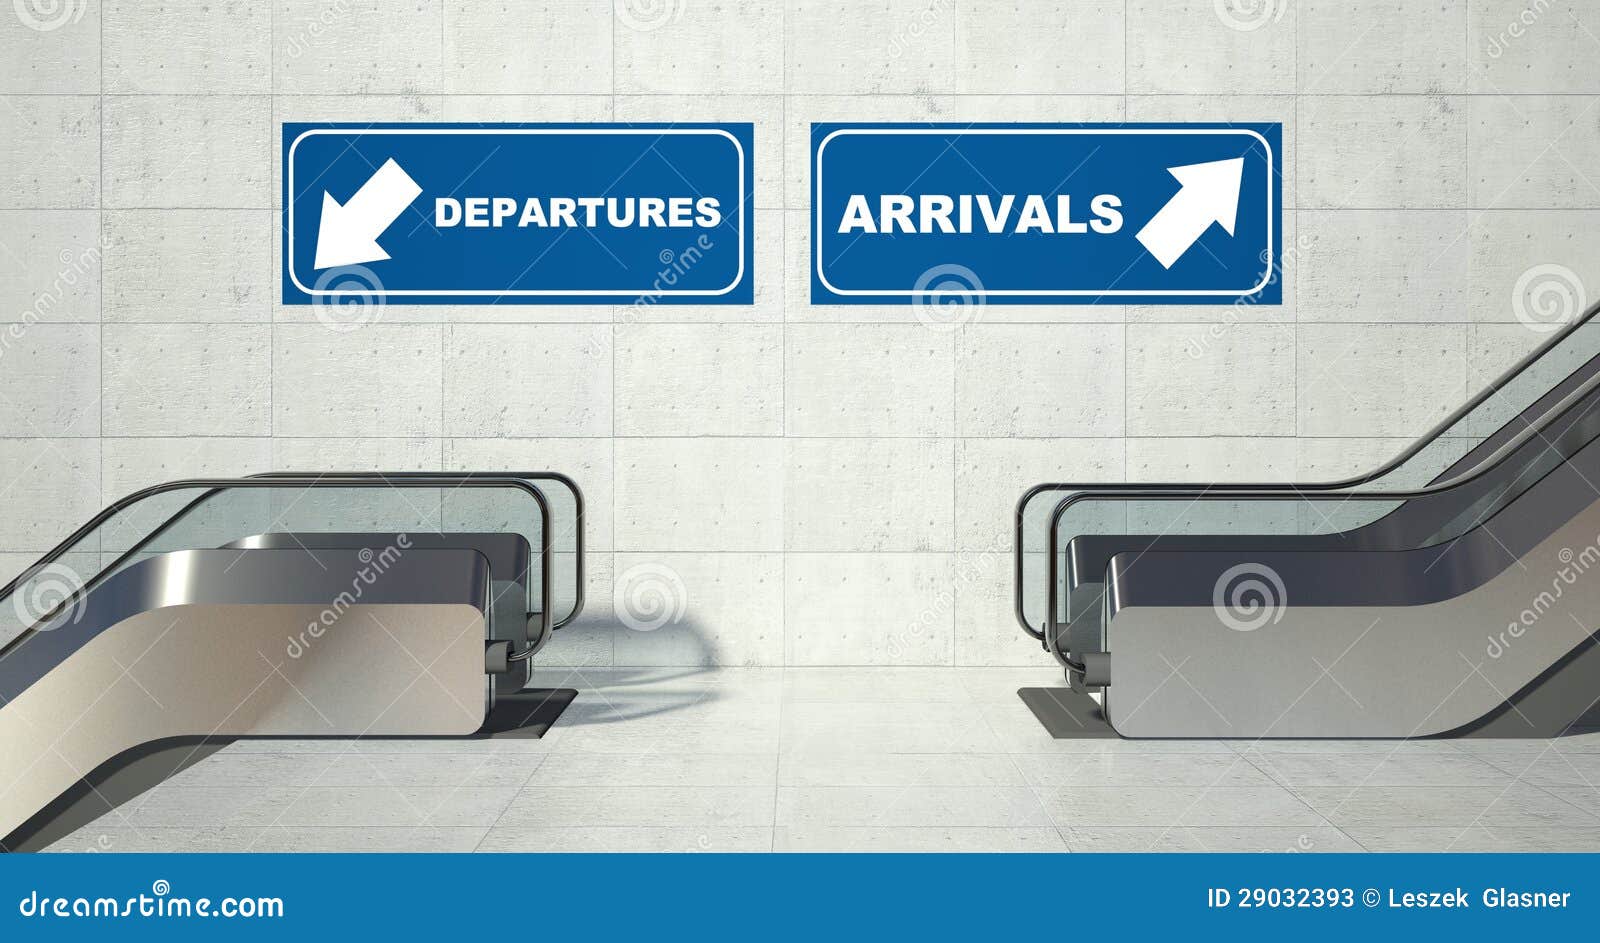 moving escalator stairs, arrivals departures sign